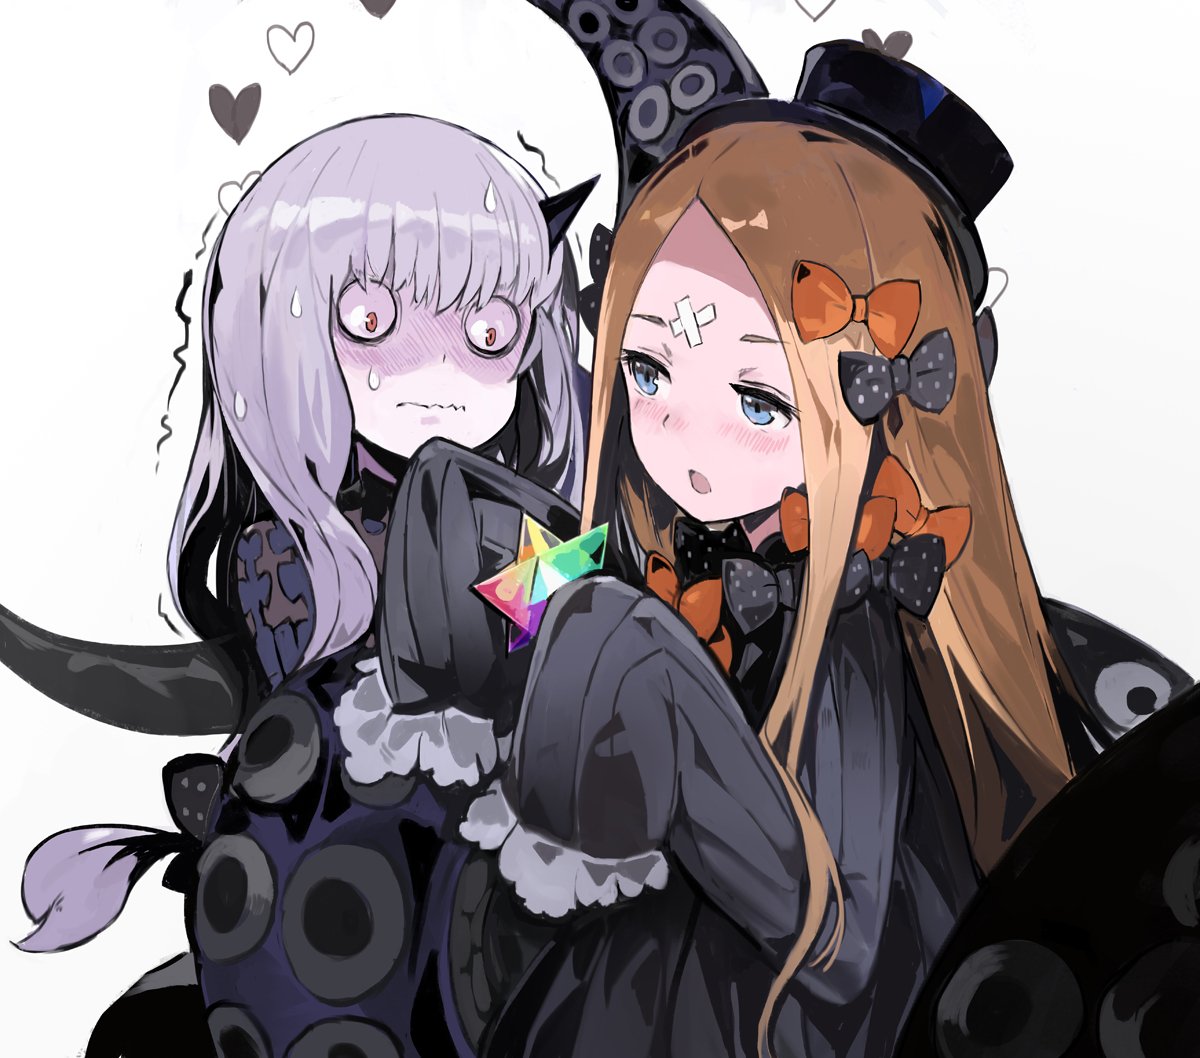 2girls abigail_williams_(fate/grand_order) andrian_gilang bags_under_eyes bangs black_bow black_dress black_hat bow dress fate/grand_order fate_(series) forehead hat horn lavinia_whateley_(fate/grand_order) multiple_girls orange_bow pale_skin parted_bangs polka_dot polka_dot_bow sleeves_past_fingers sleeves_past_wrists tentacle wide-eyed